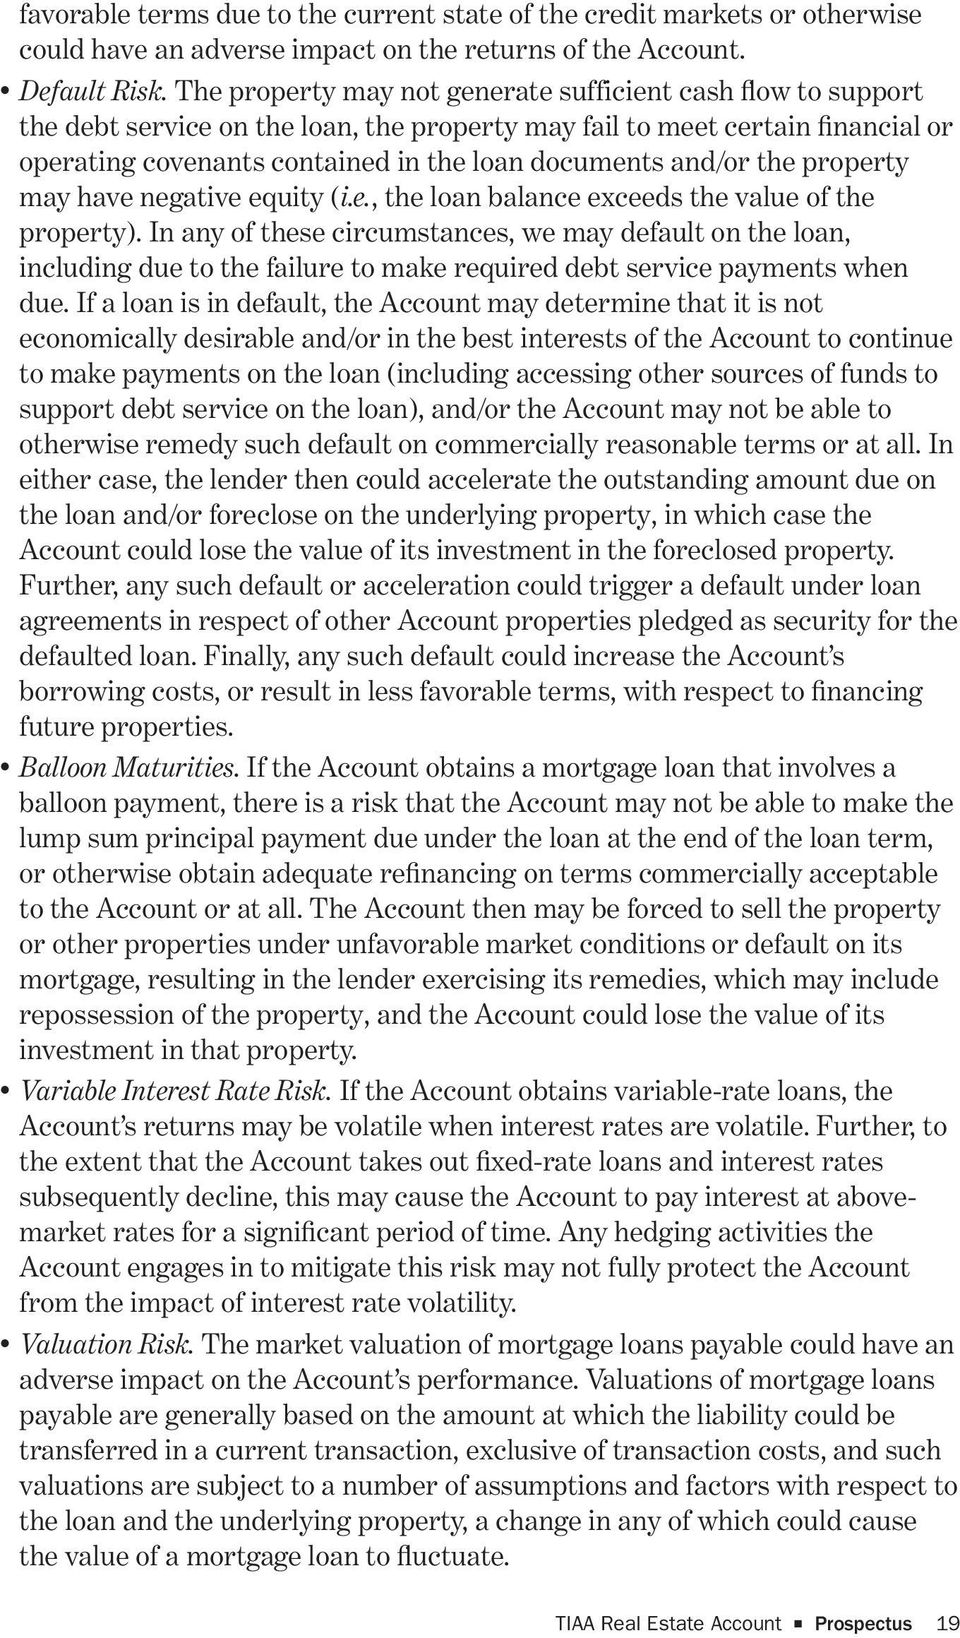 and/or the property may have negative equity (i.e., the loan balance exceeds the value of the property).